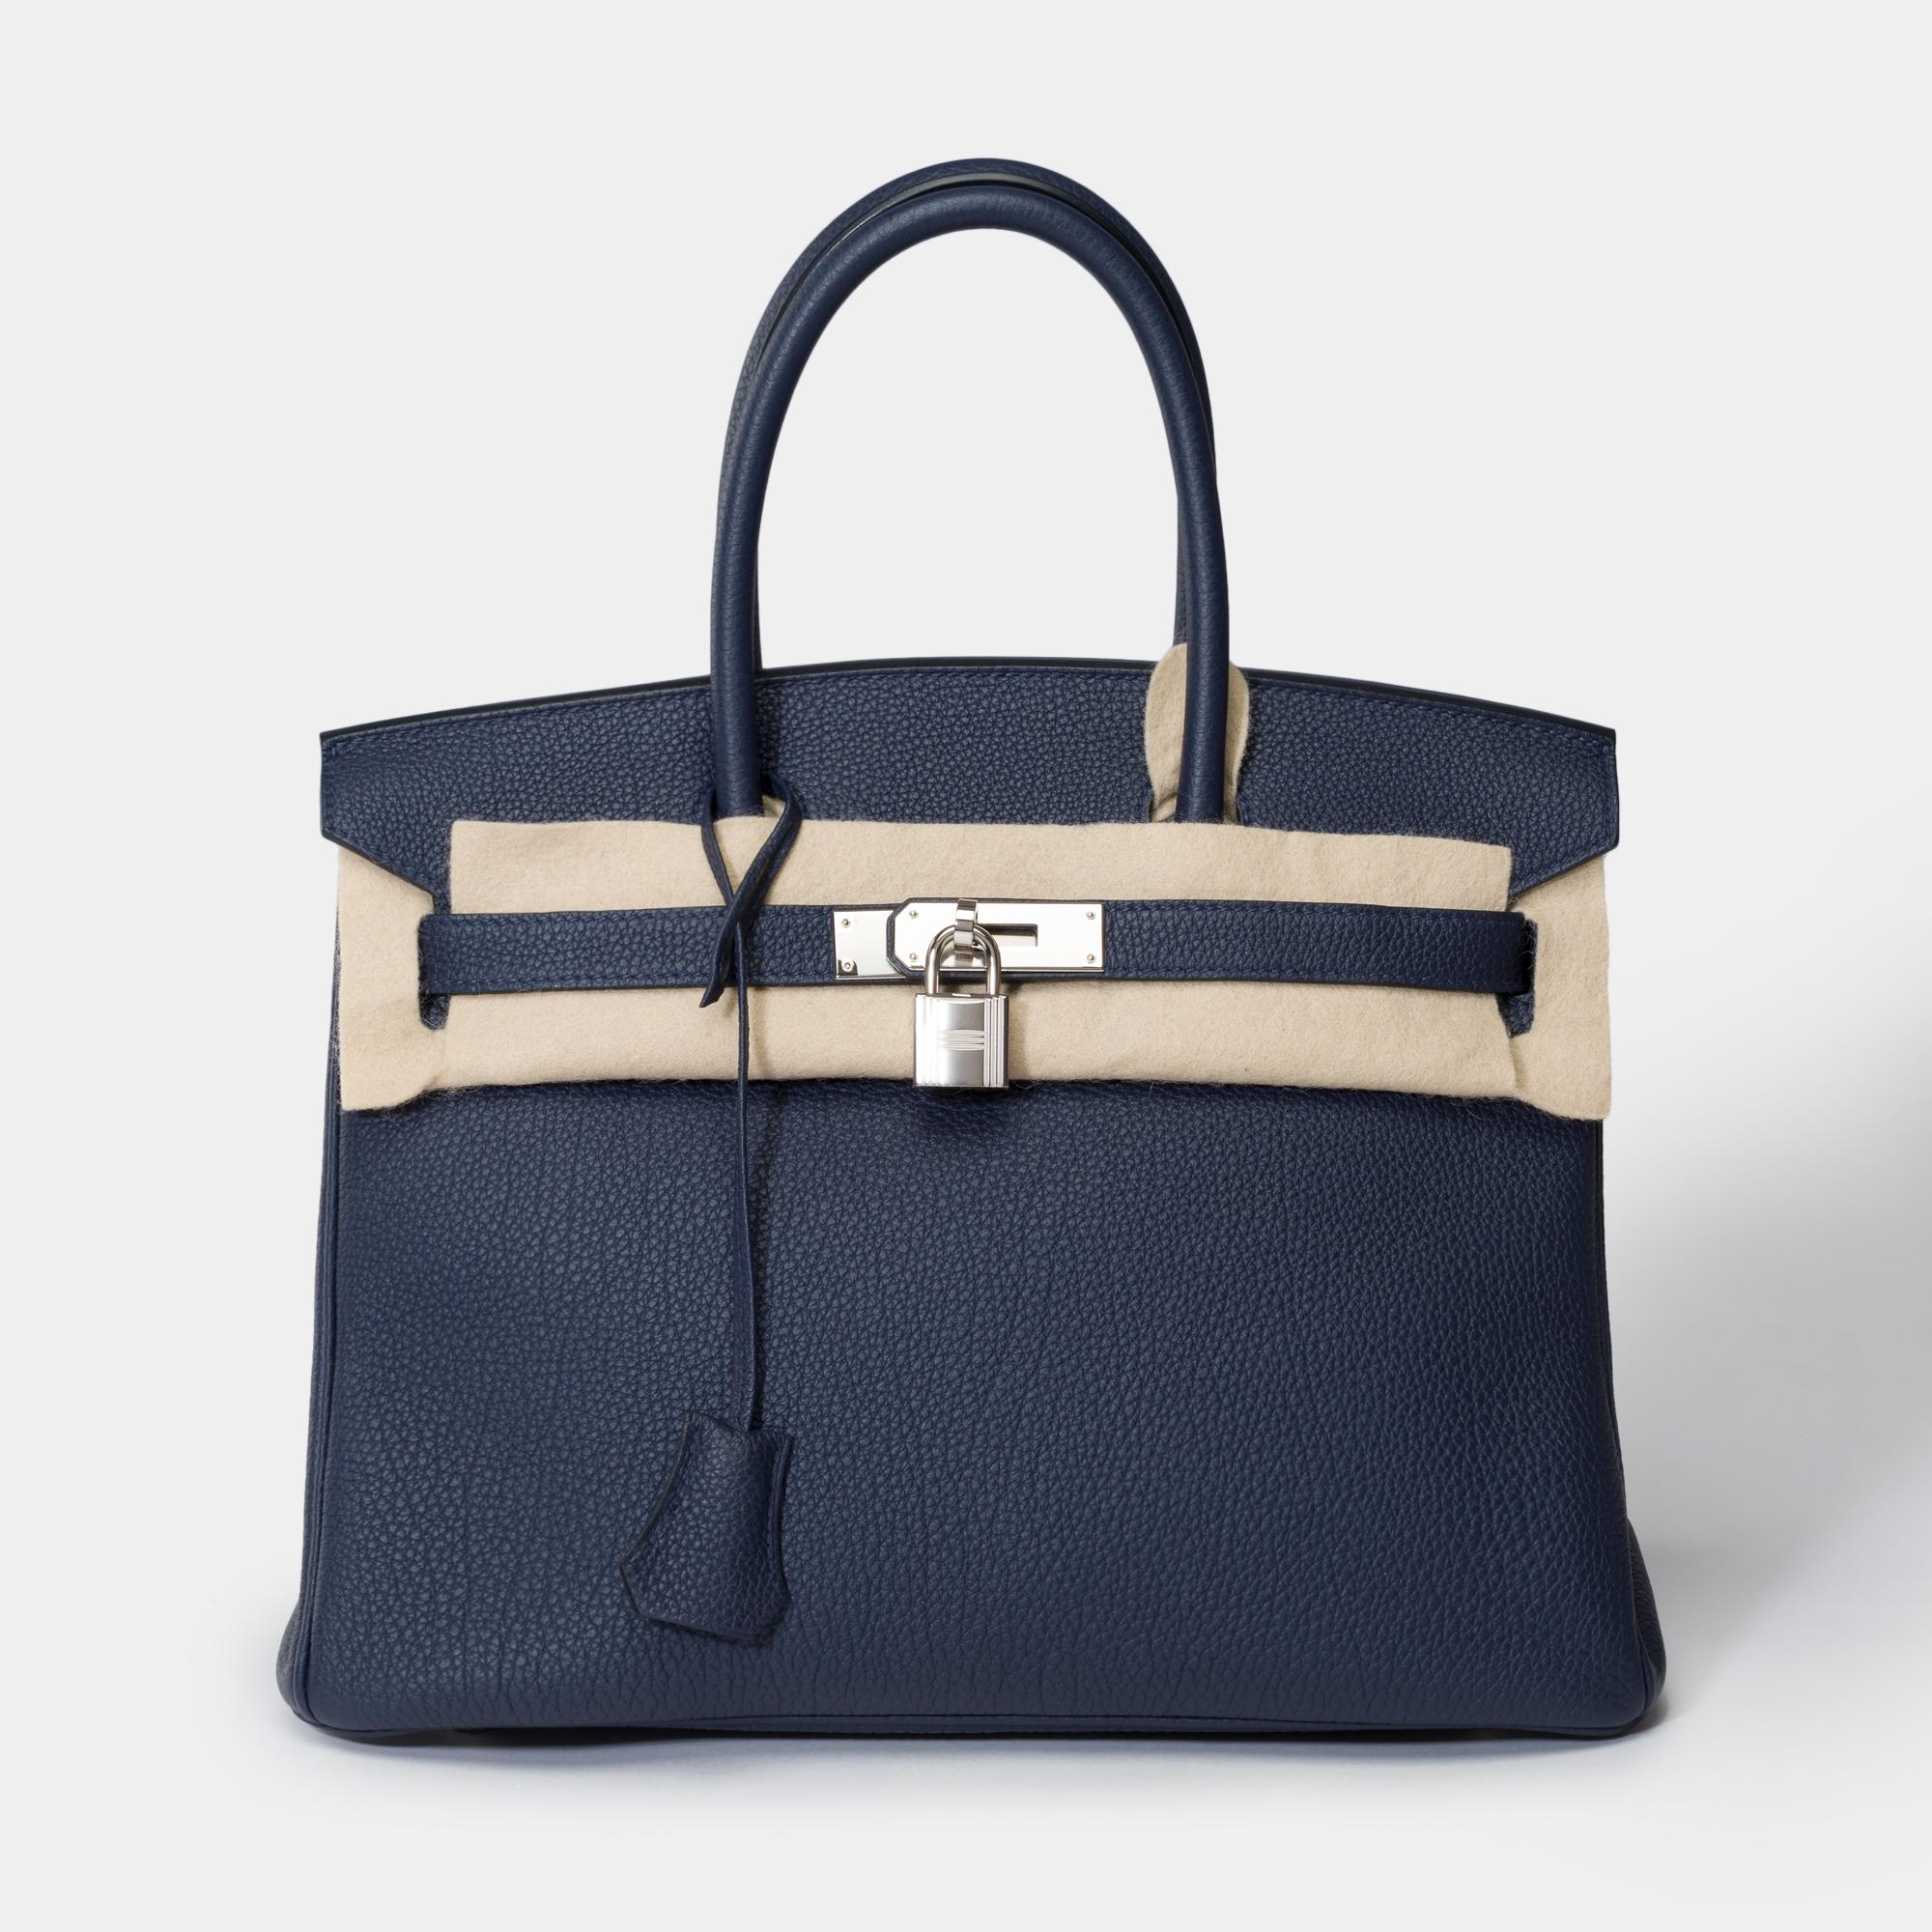 Amazing​ ​Hermes​ ​Birkin​ ​30​ ​handbag​ ​in​ ​Bleu​ ​nuit​ ​Togo​ ​leather​ ​,​ ​palladium​ ​silver​ ​plated​ ​metal​ ​trim,​ ​double​ ​handle​ ​in​ ​blue​ ​leather​ ​allowing​ ​a​ ​hand​ ​carry

Flap​ ​closure
Blue​ ​leather​ ​inner​ ​lining​ ​,​